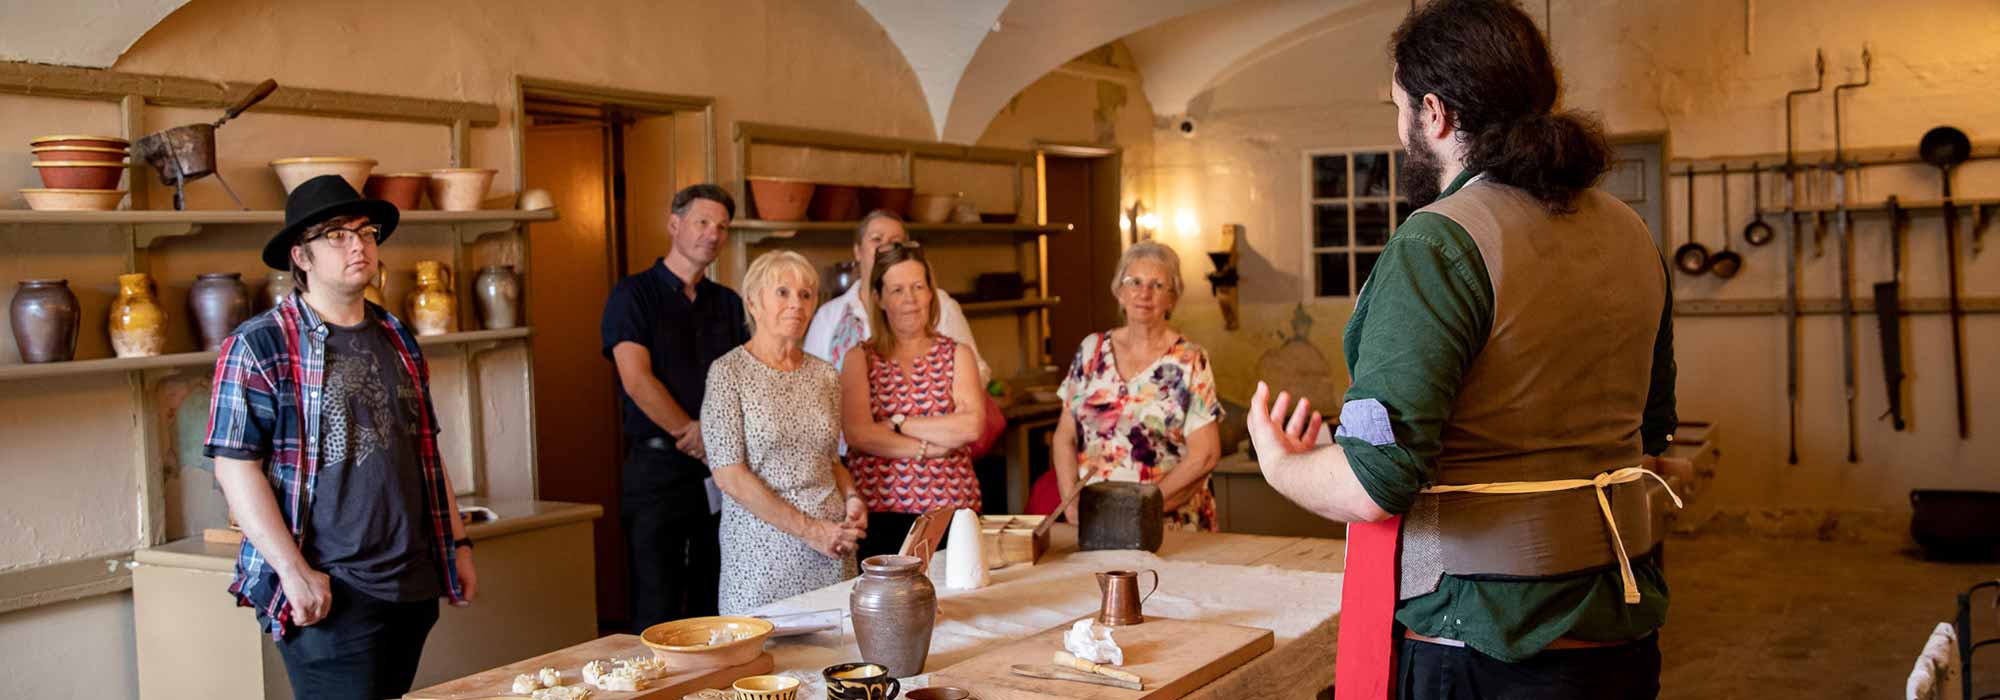 A group of visitors listen to a talk by a man in an apron in the Mansion House kitchen.